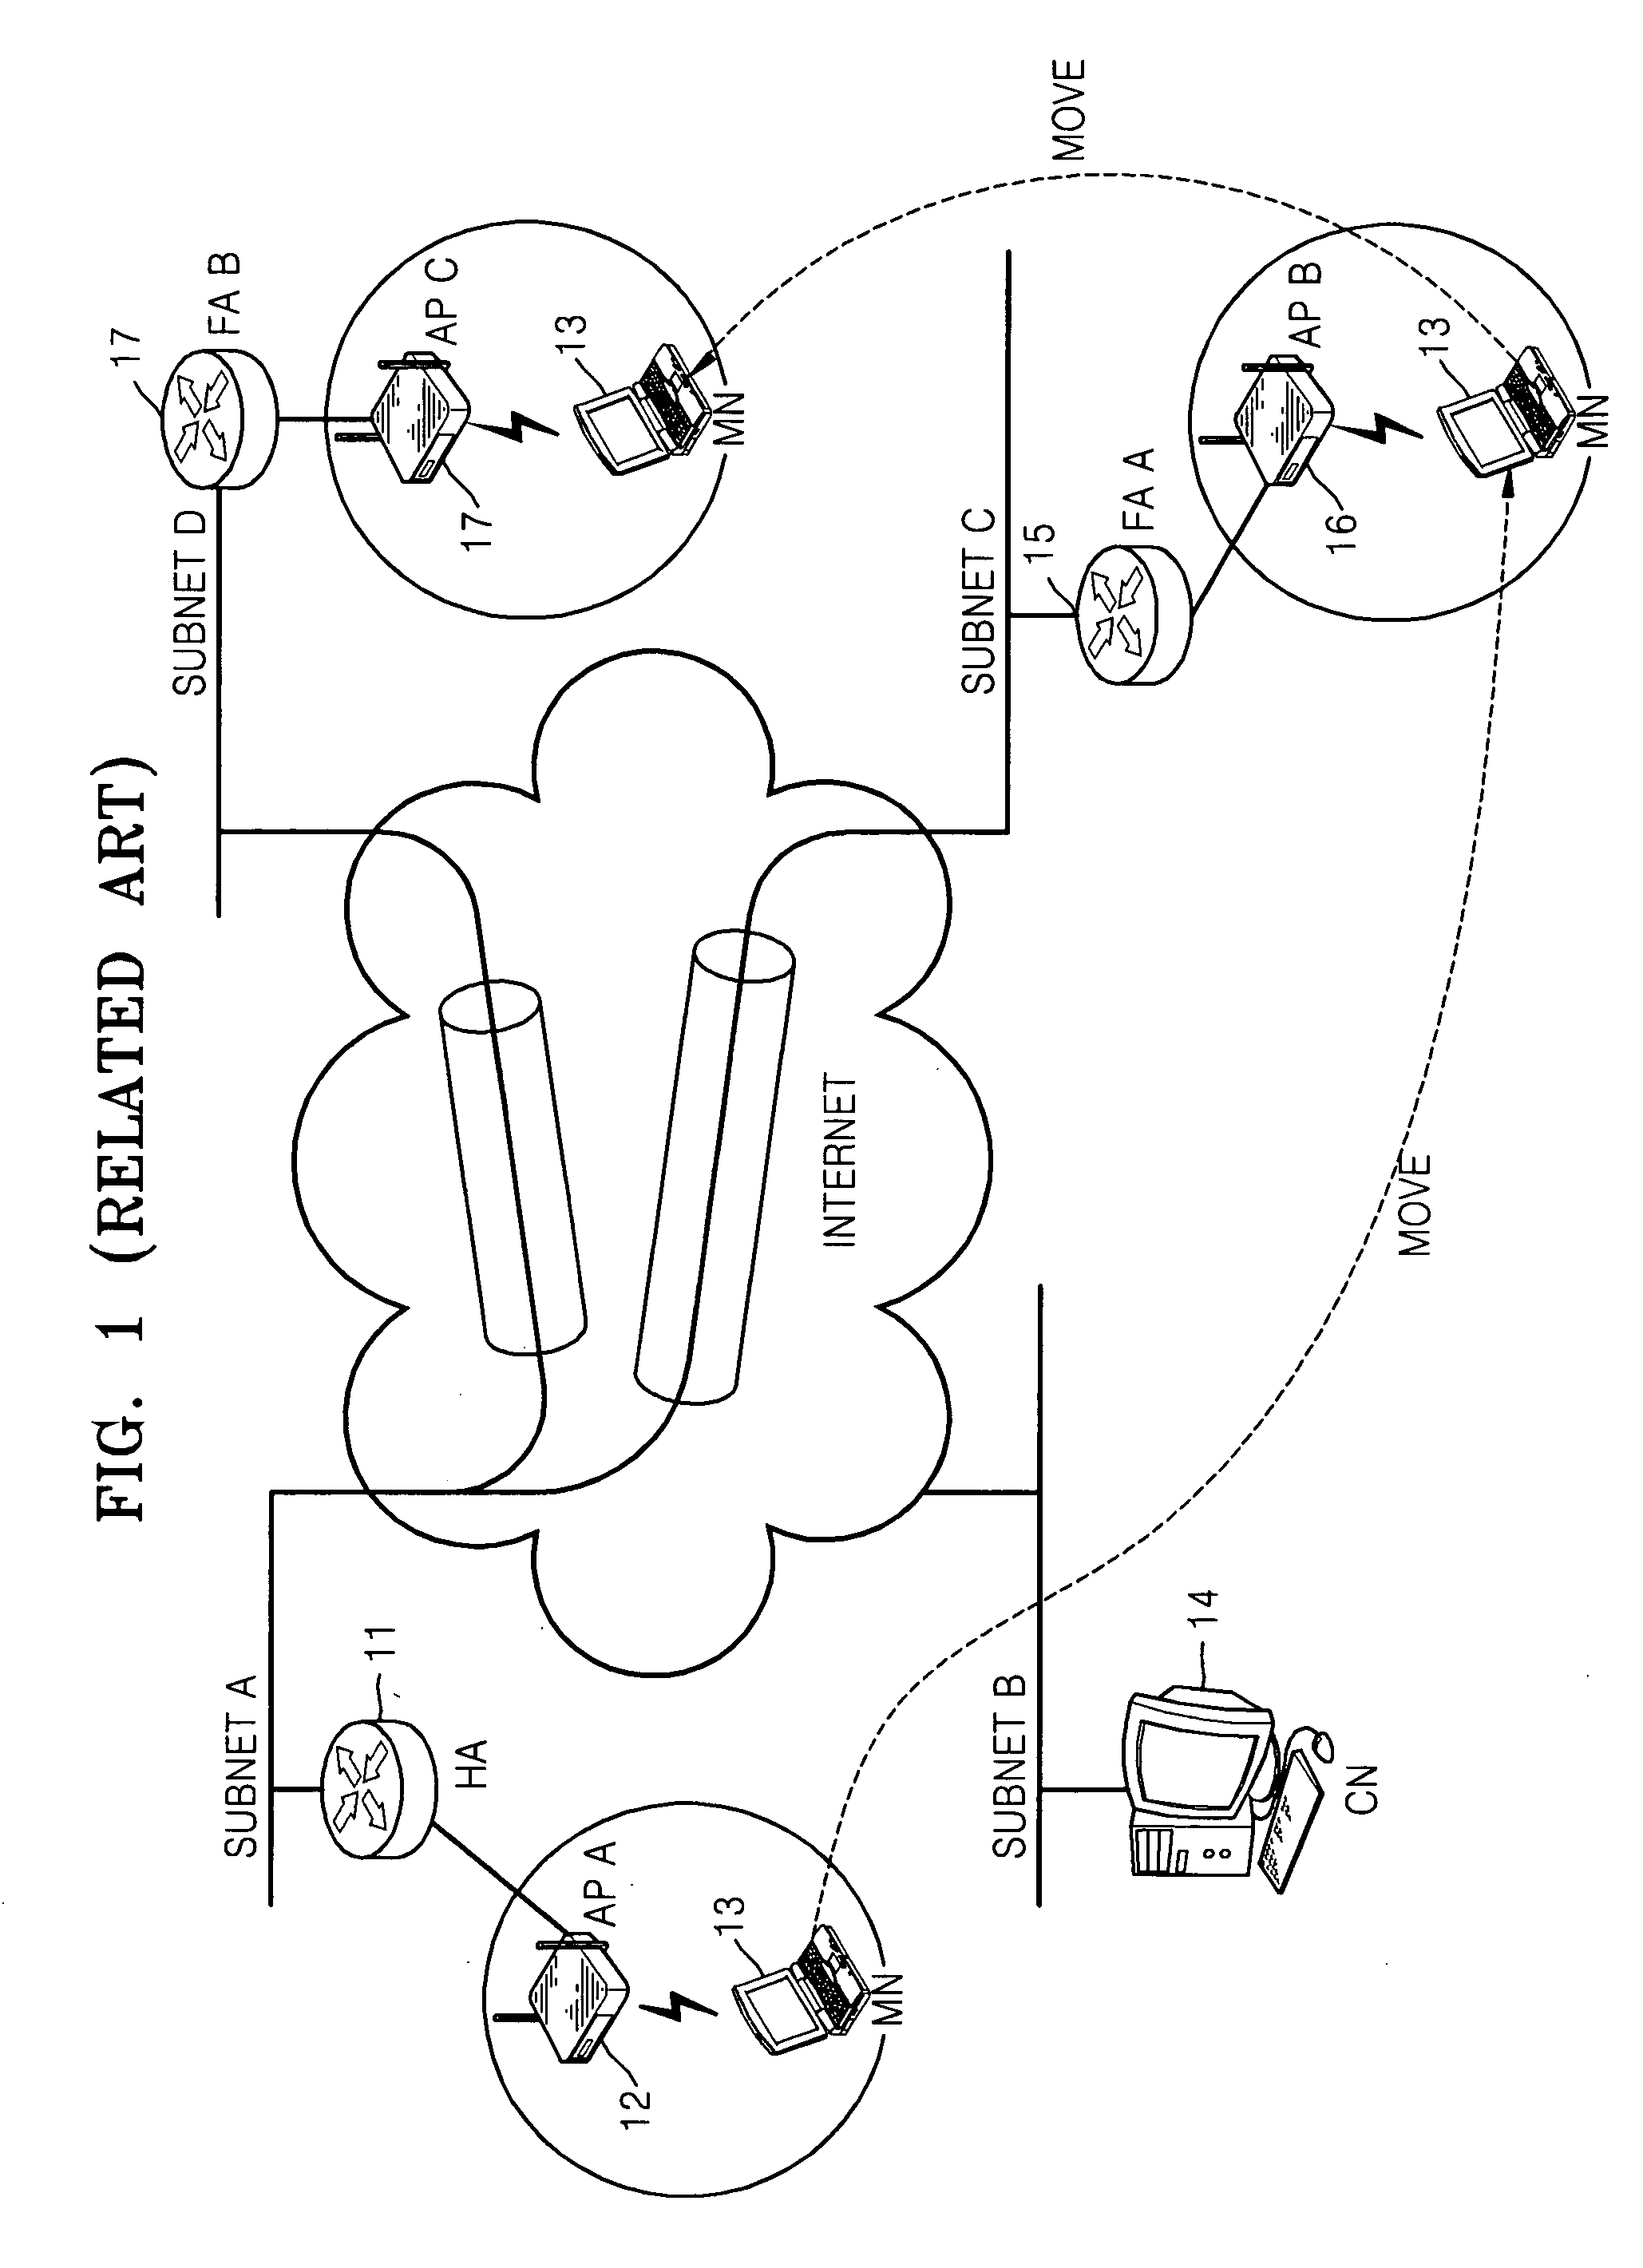 Method and apparatus for transmitting router advertisement and router solicitation messages through access point